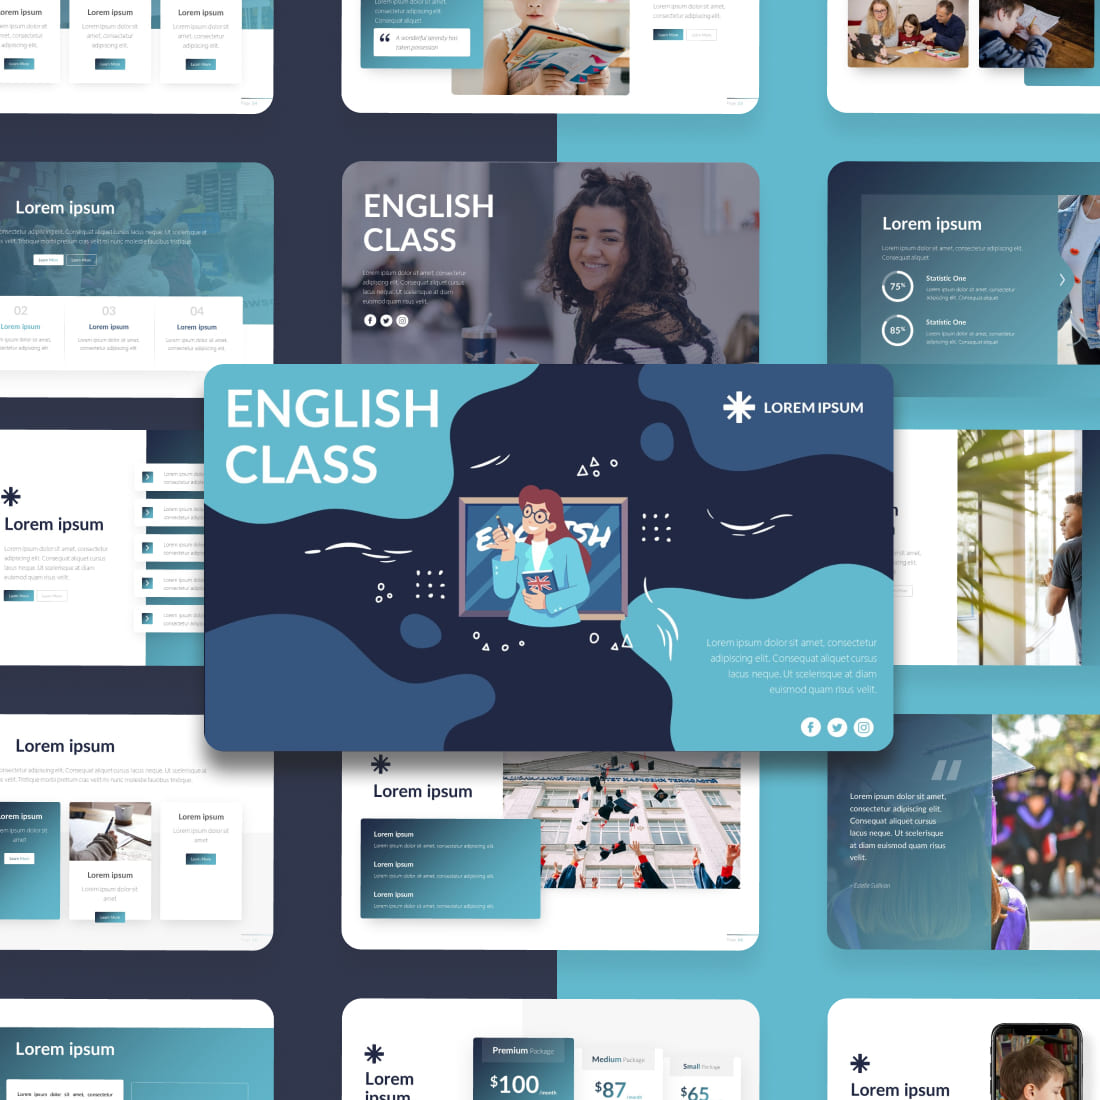 English Class Powerpoint Template: 50 Slides cover.